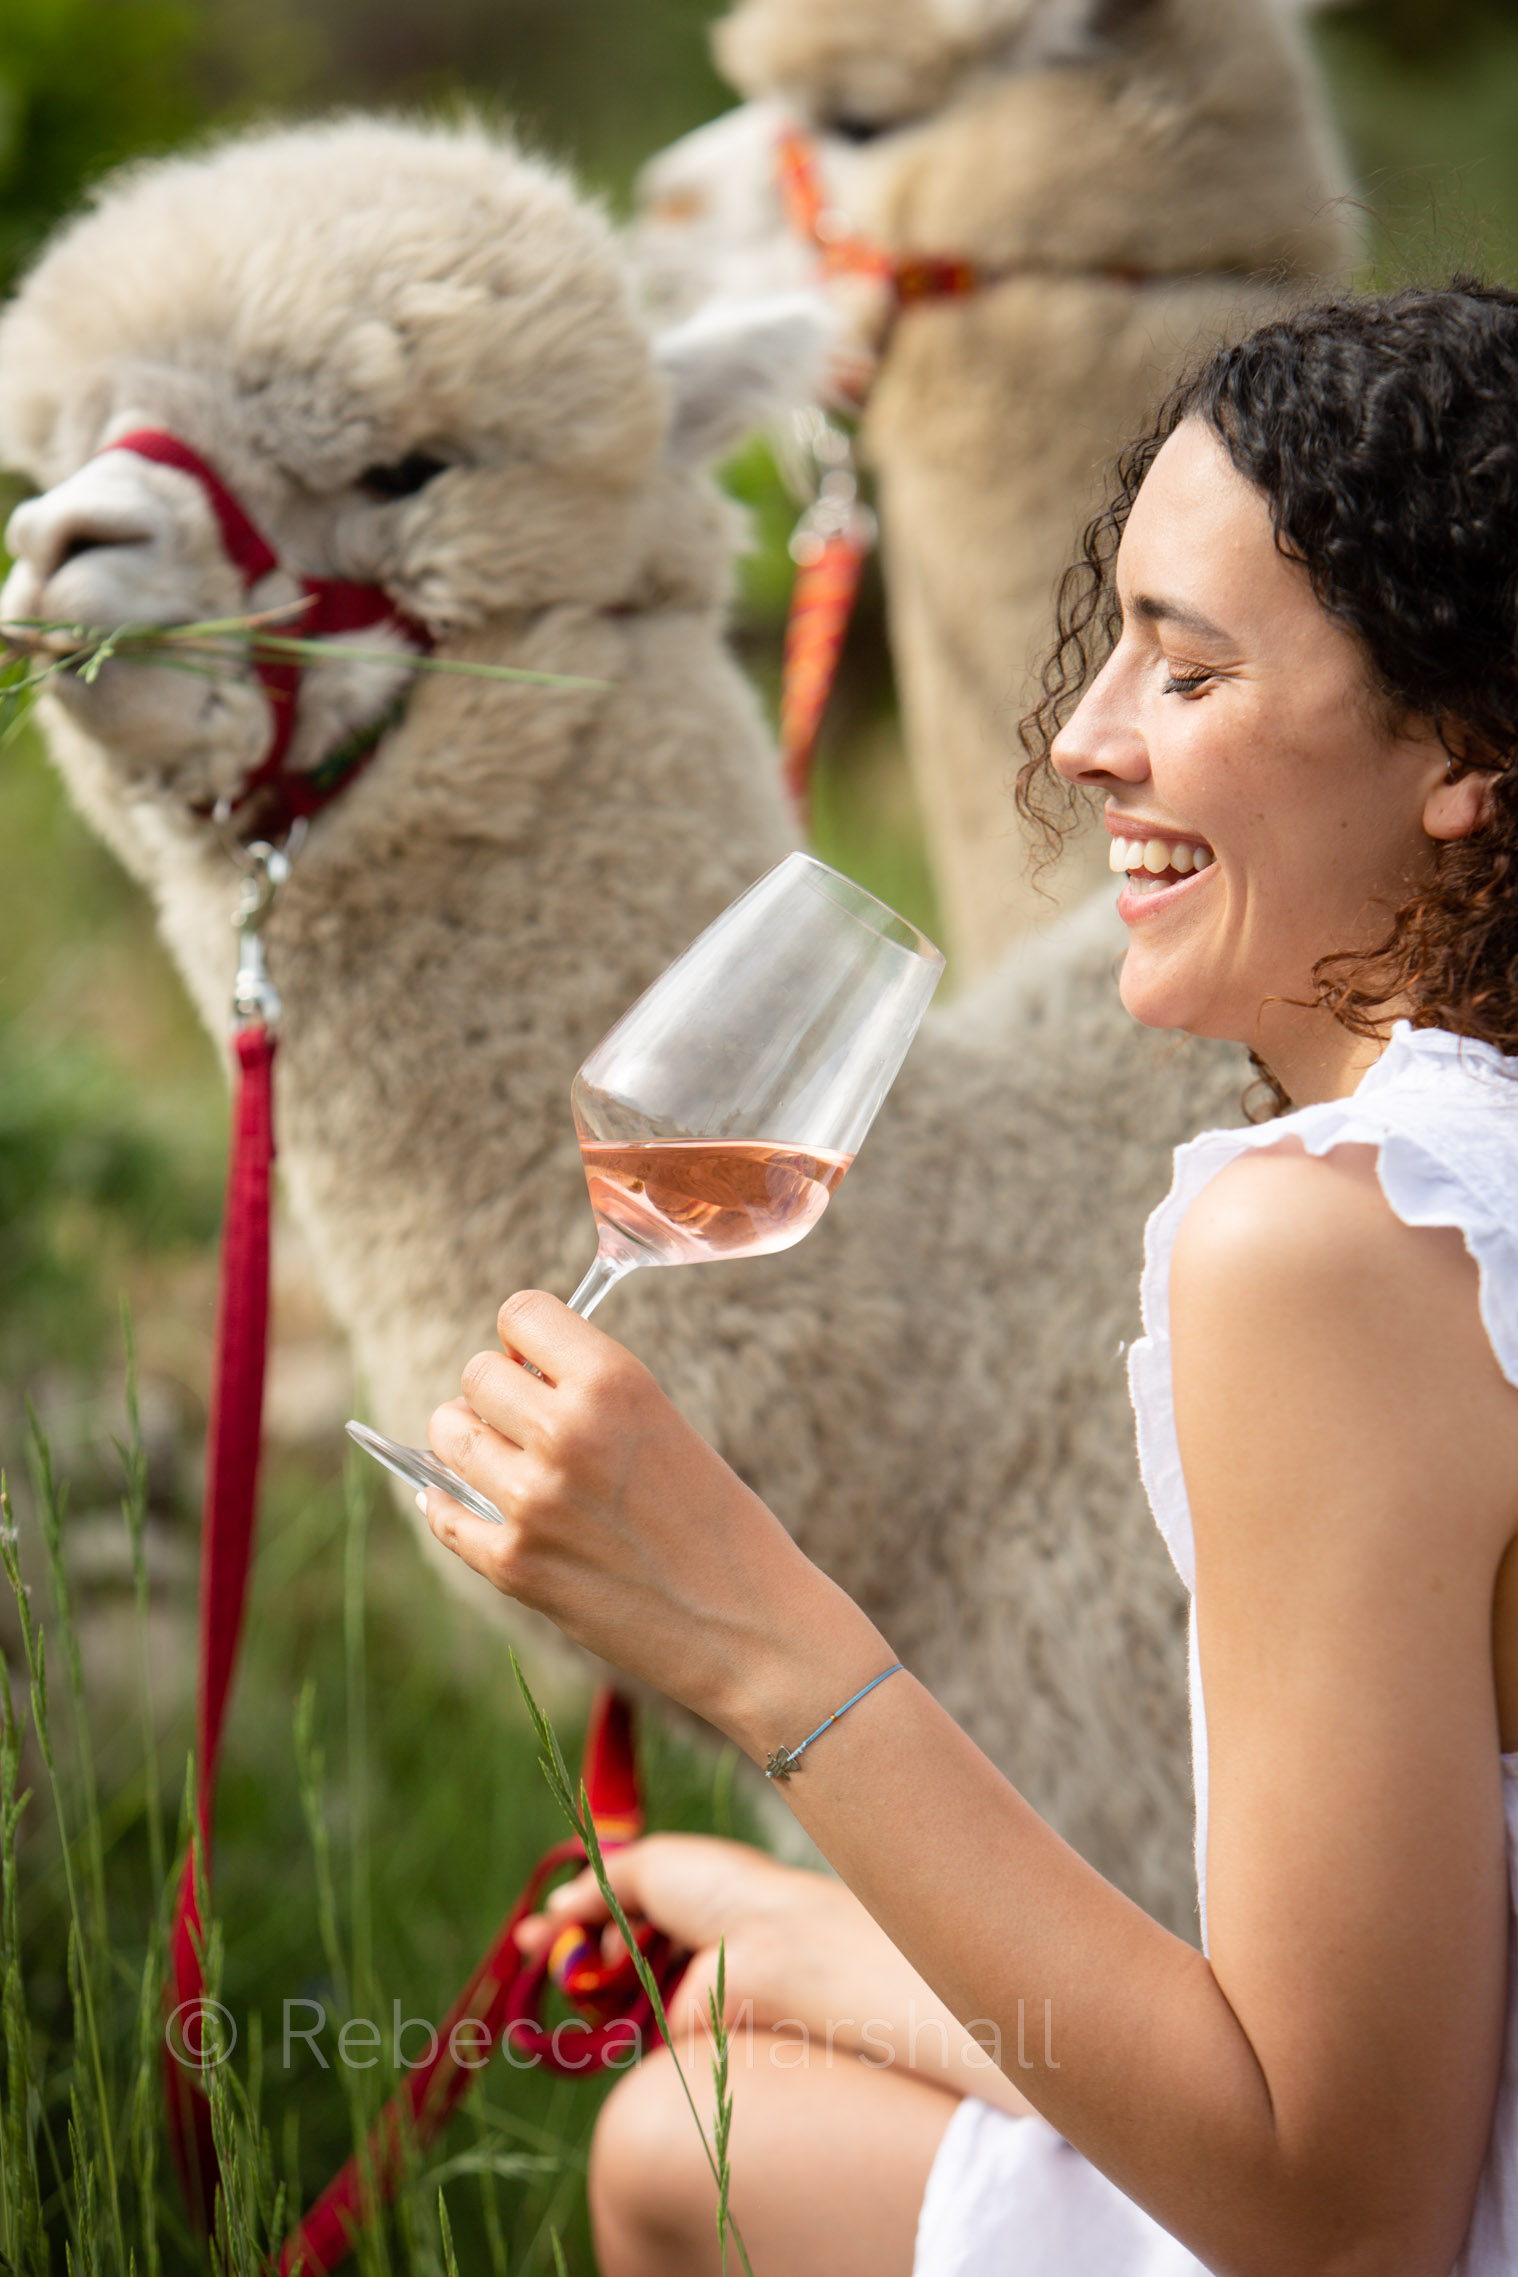 A model smiles with a glass of rose wine in her hand; two llamas graze in the backgroud